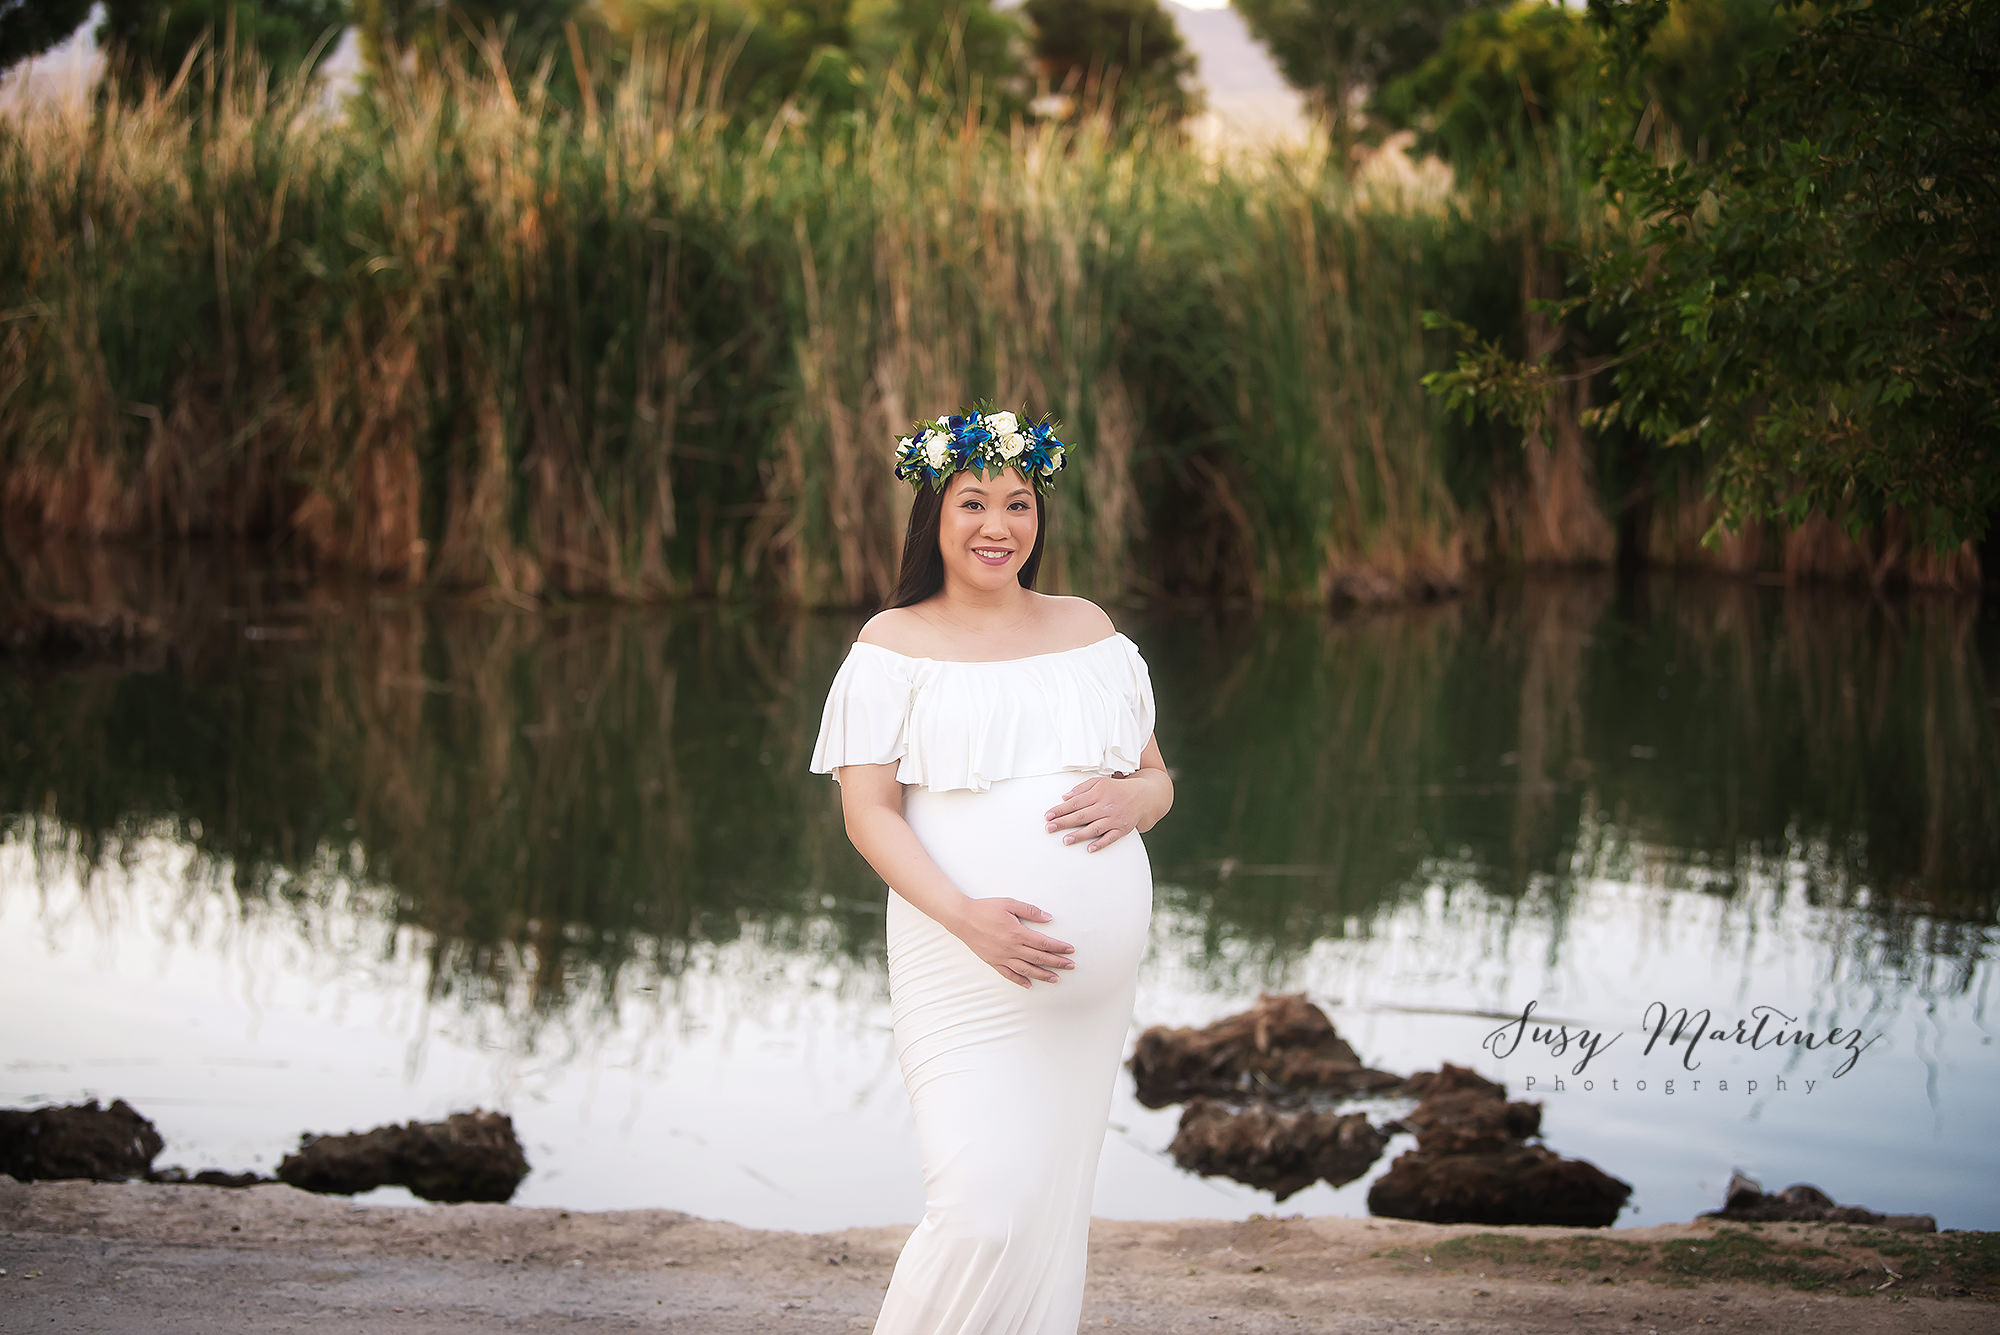 mom in white Sew Trendy Accessories gown with flower crown poses by lake in Nevada park